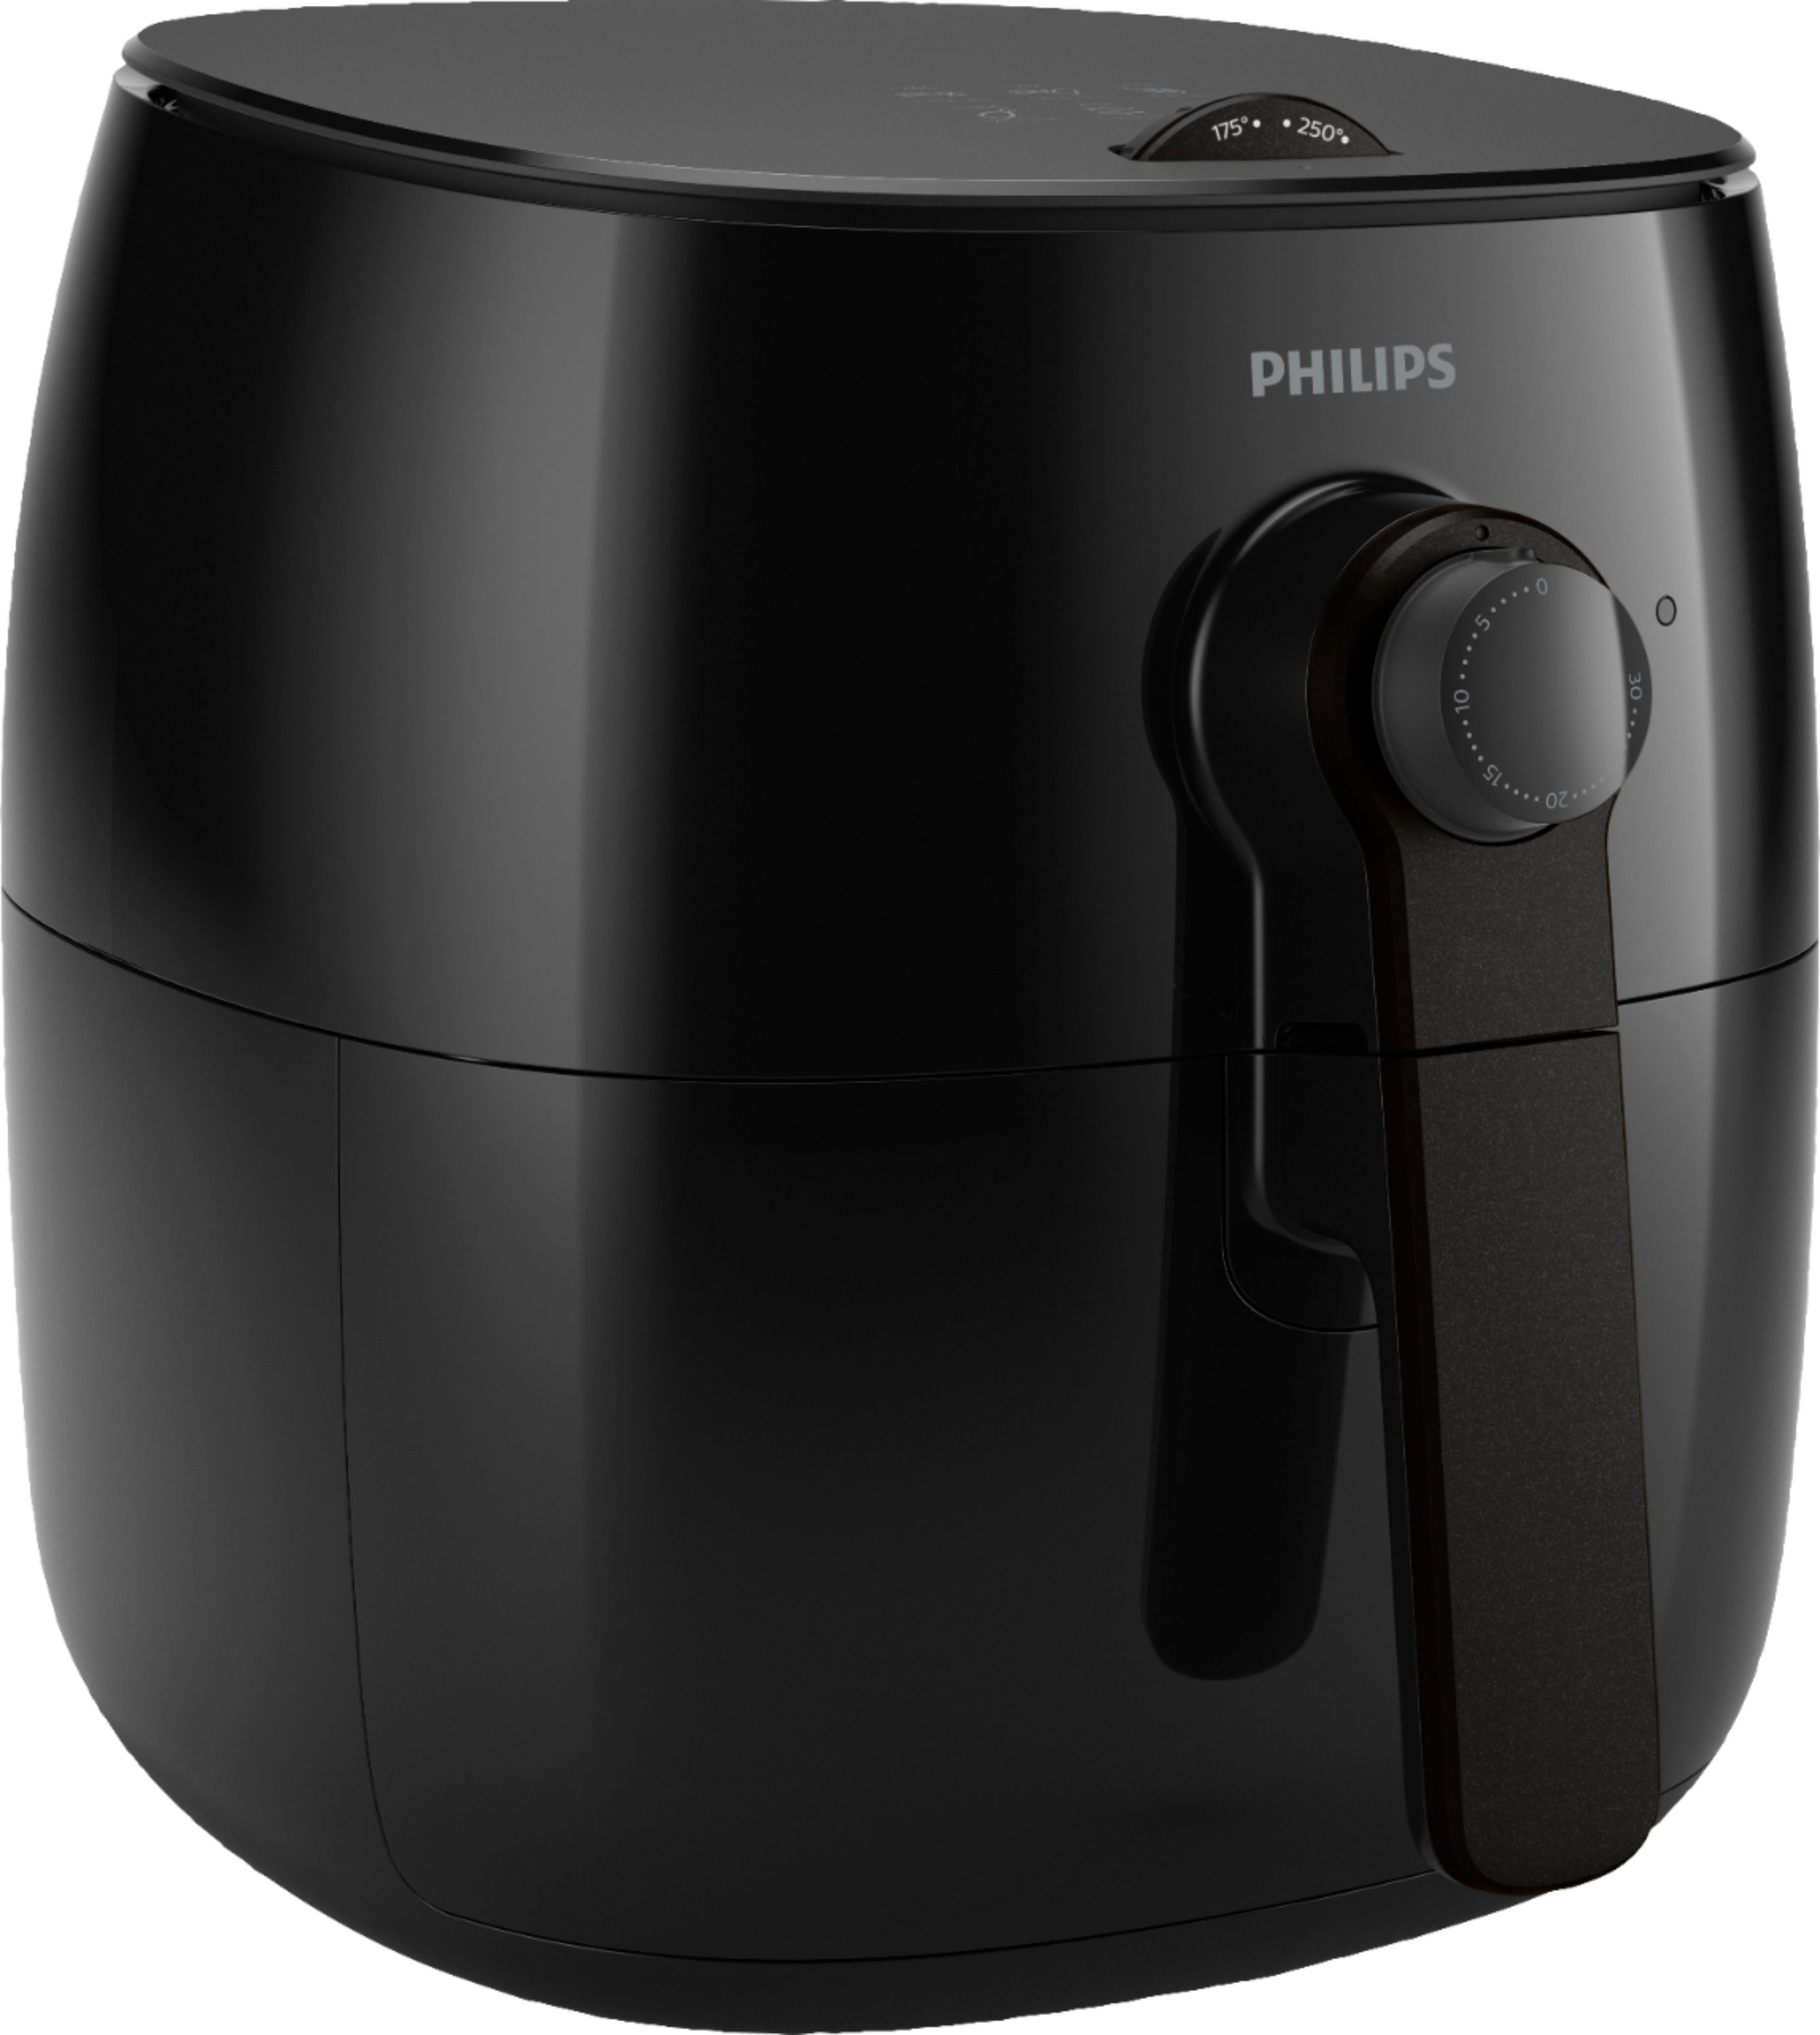 Angle View: Philips - Air Fryer - Black